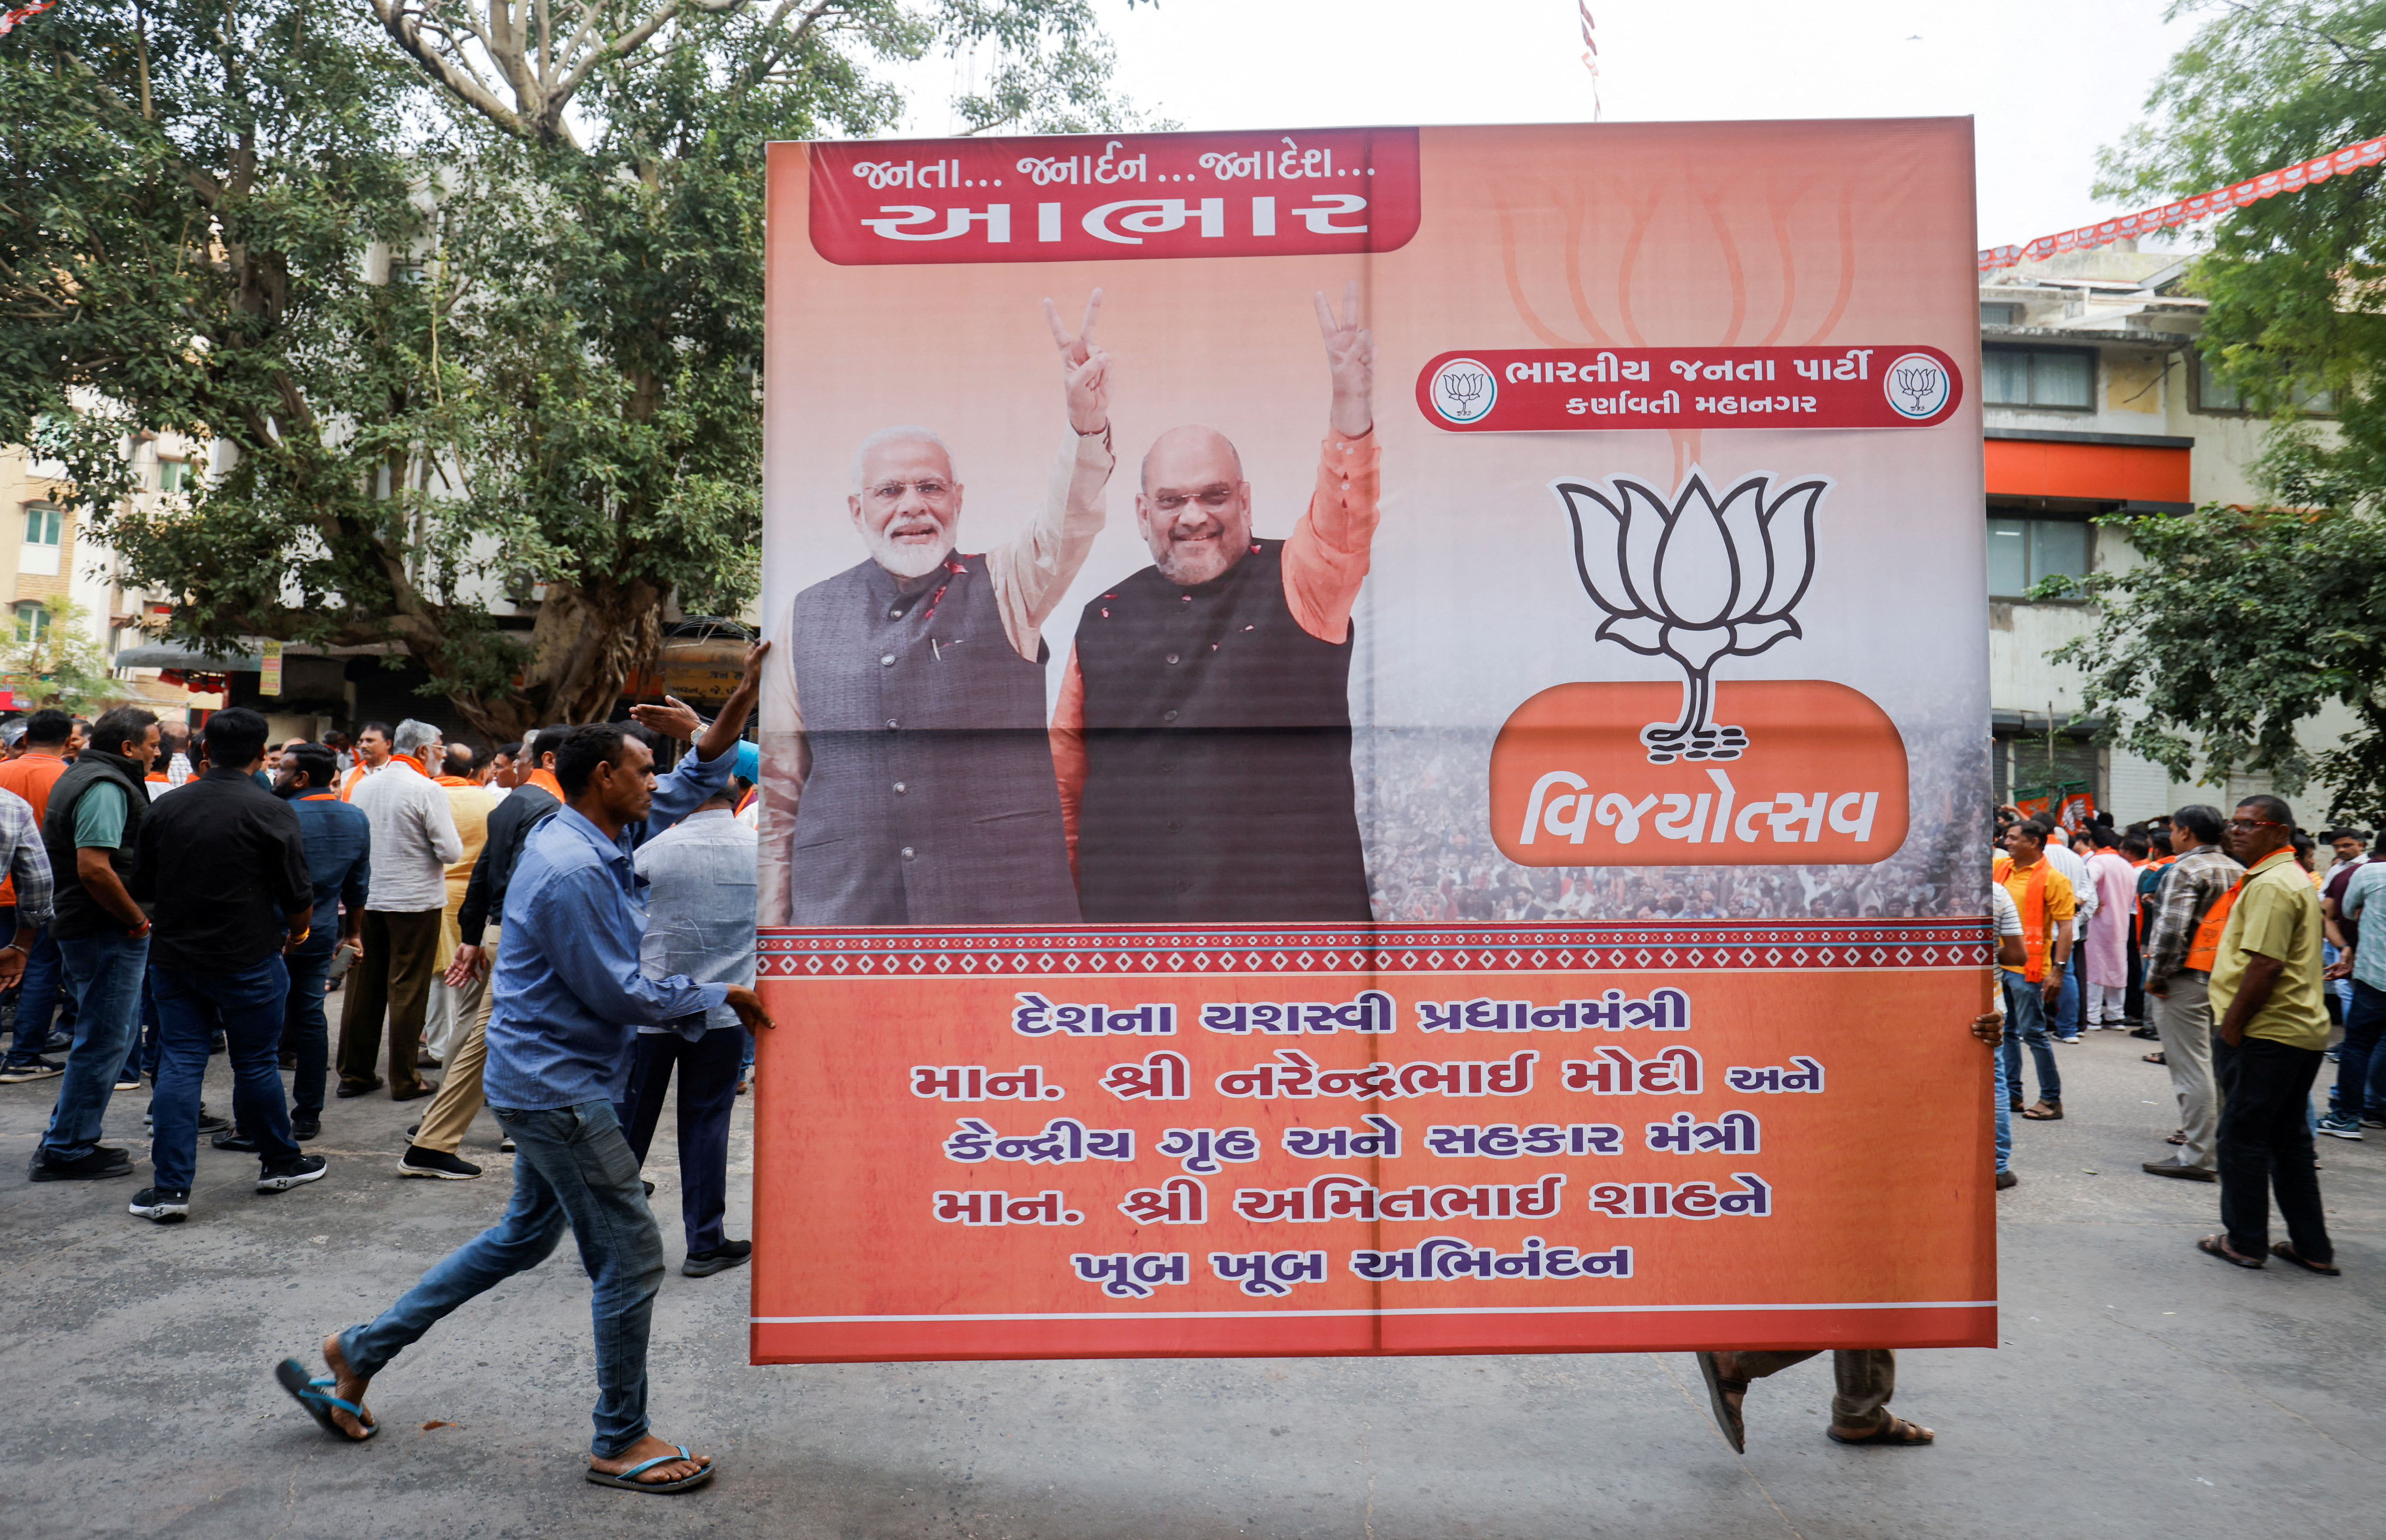 FILE PHOTO: Supporters of India's ruling Bharatiya Janata Party (BJP) carry a hoarding of Indian Prime Minister Narendra Modi and Union Minister of Home Affairs Amit Shah for celebrations in Ahmedabad